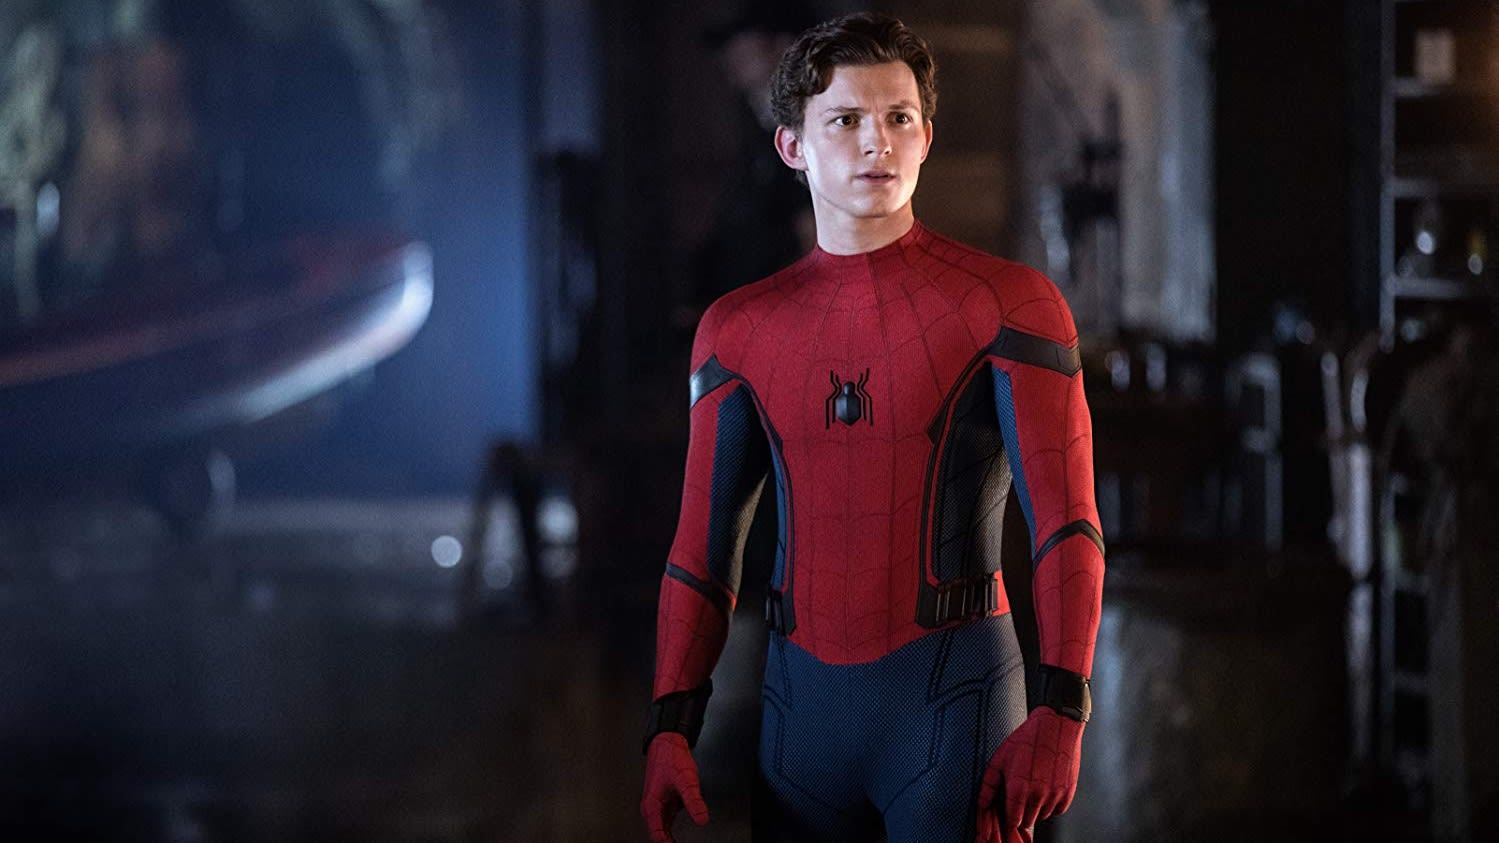 'For the moment the door is closed' on Spider-Man deal, Sony CEO says